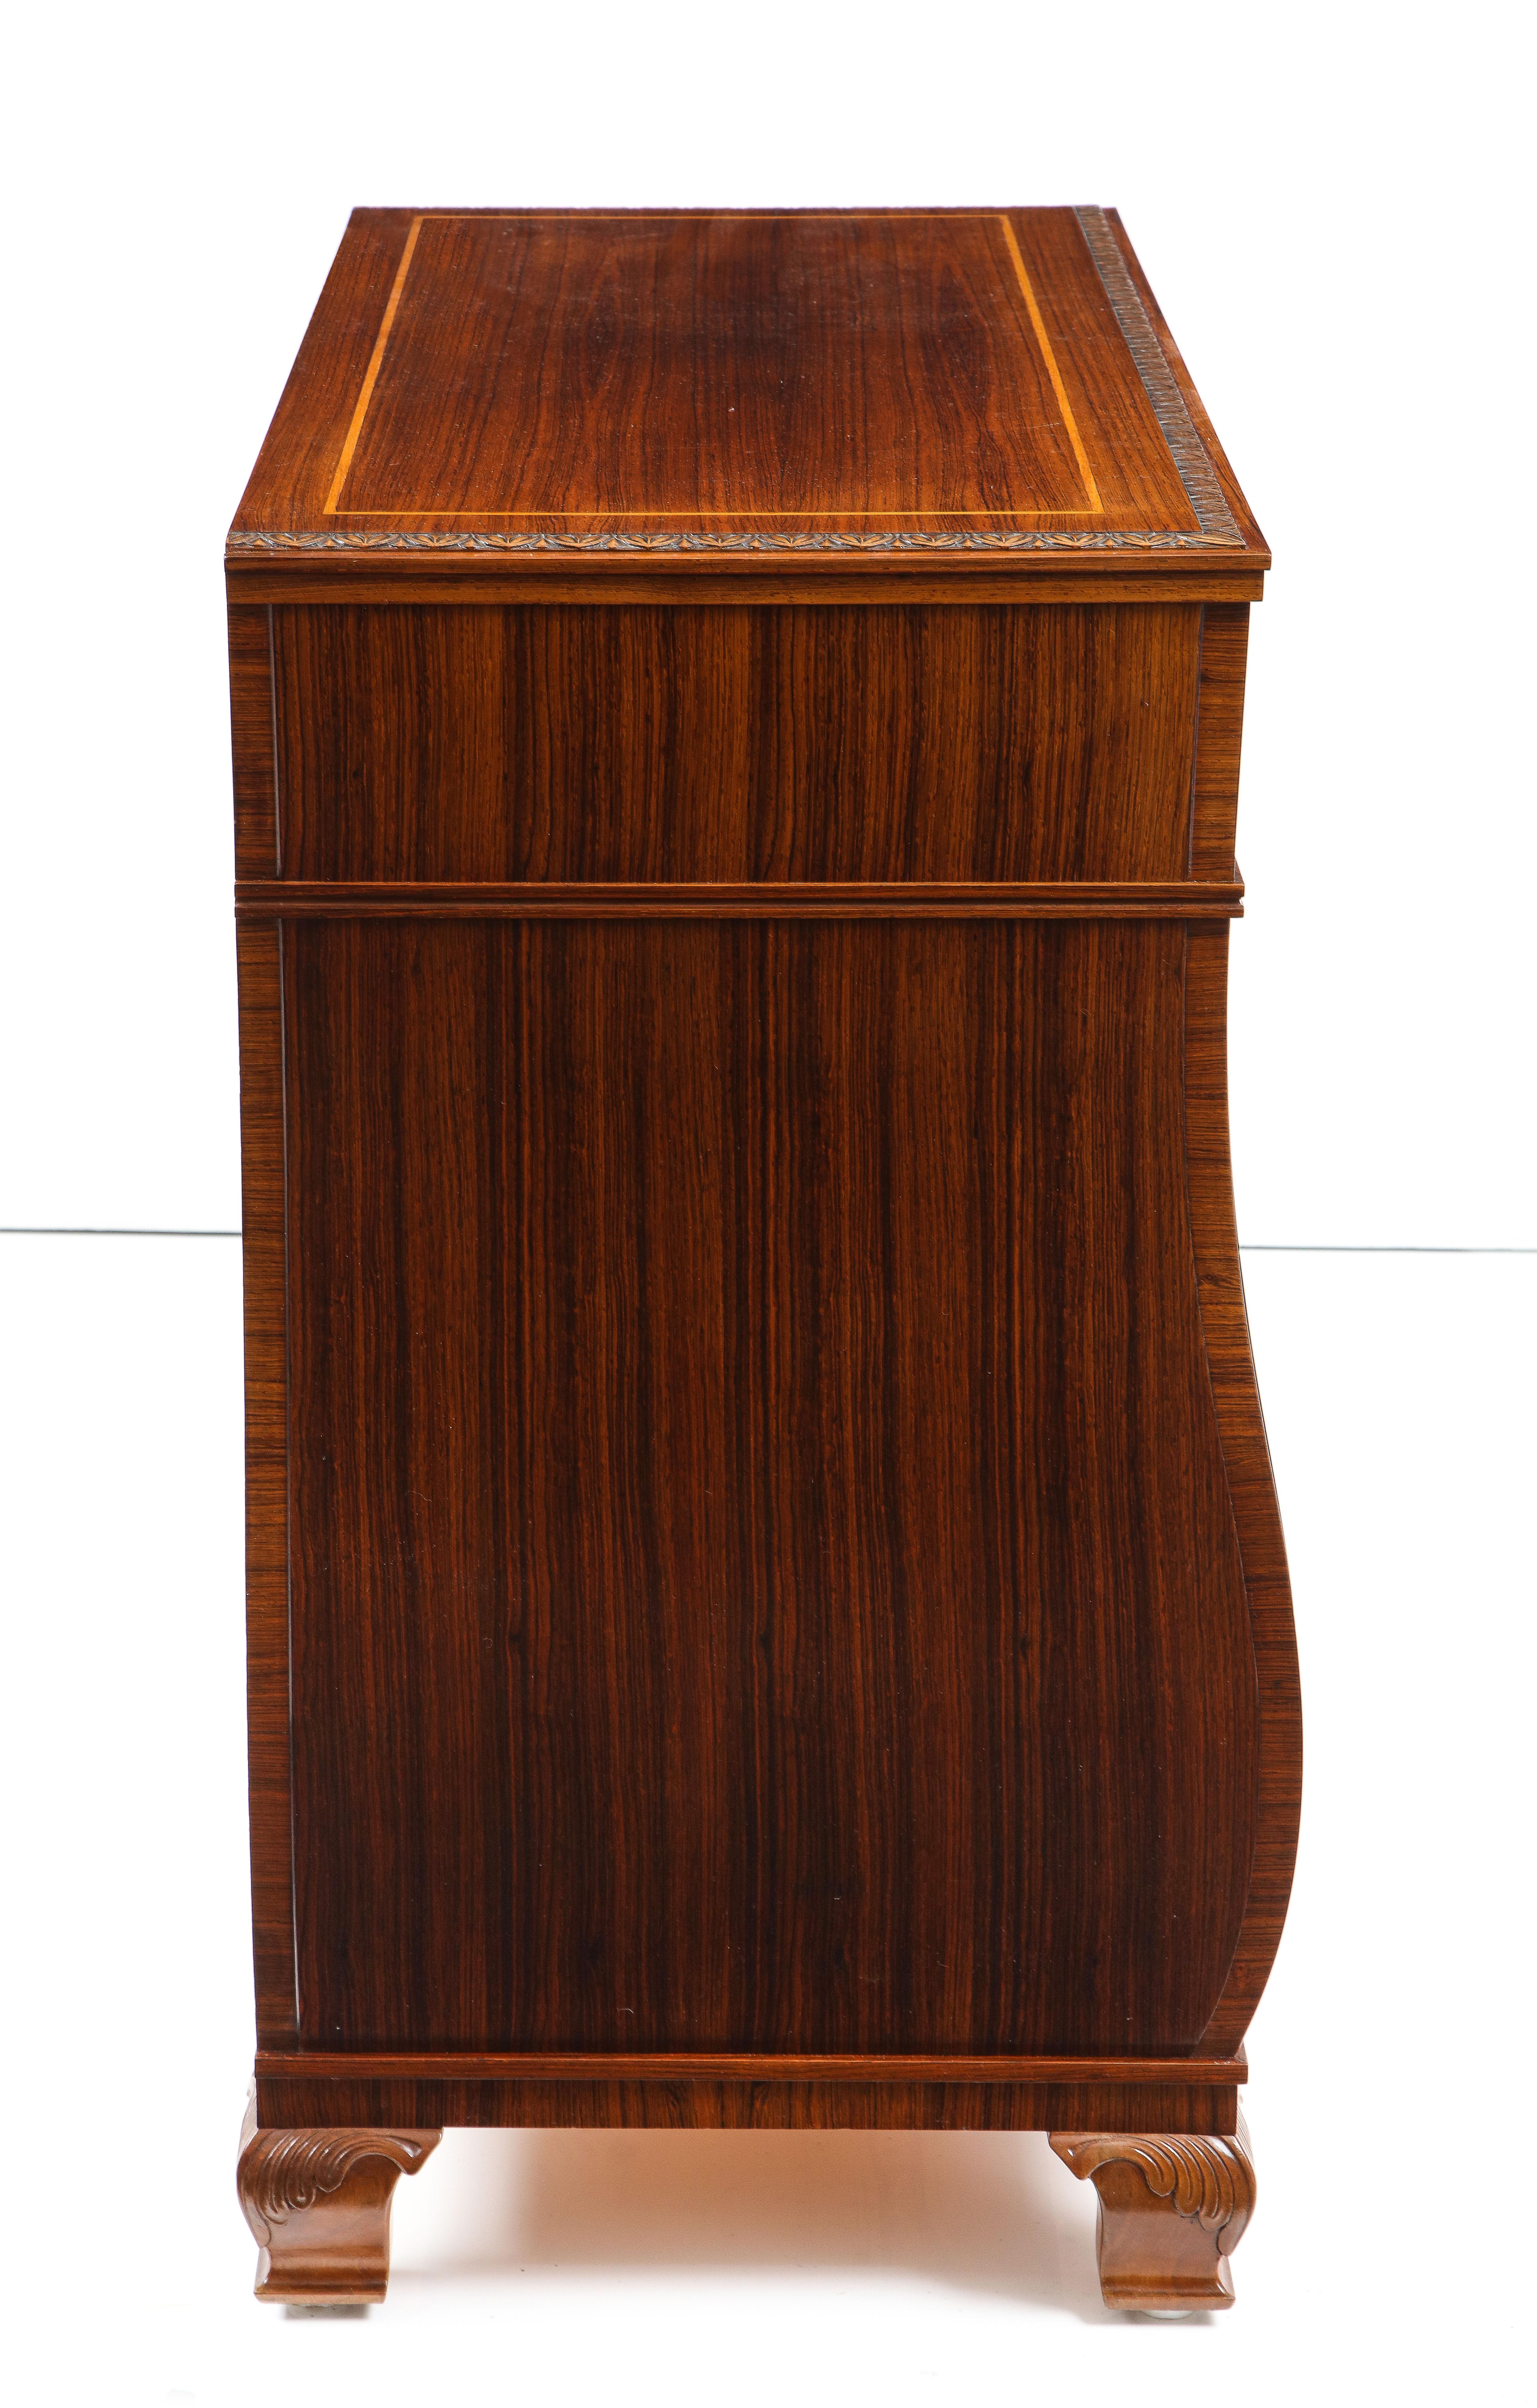 Swedish Grace Fruitwood Inlaid Rosewood Chest of Drawers, Circa 1930-40 8